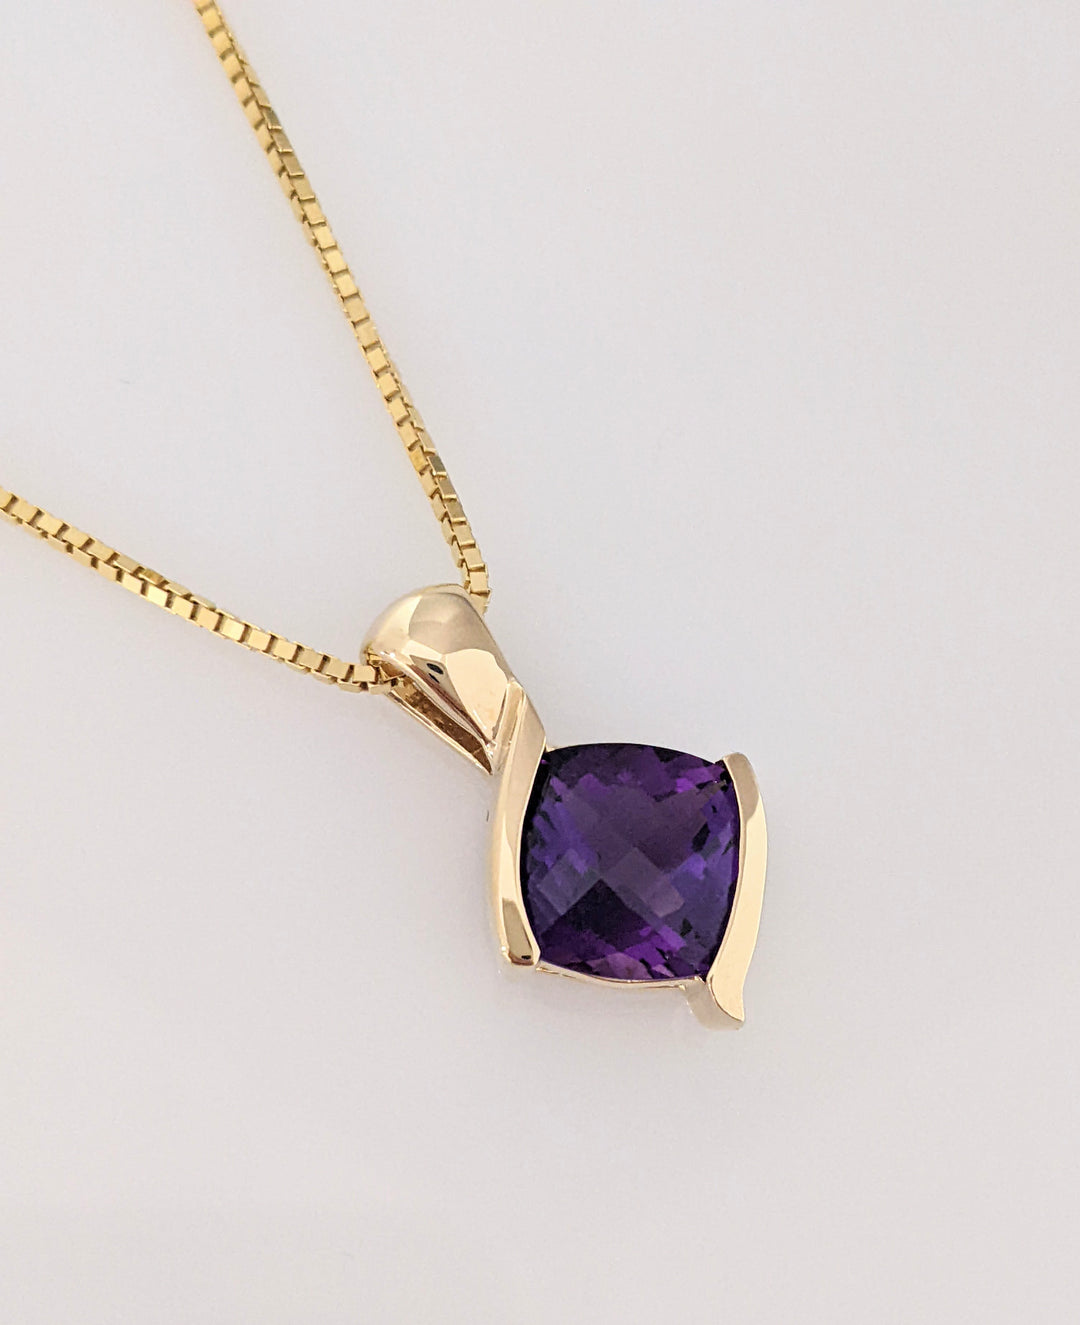 14K AMETHYST CUSHION 10MM CHECKERBOARD FACE ESTATE PENDANT AND CHAIN